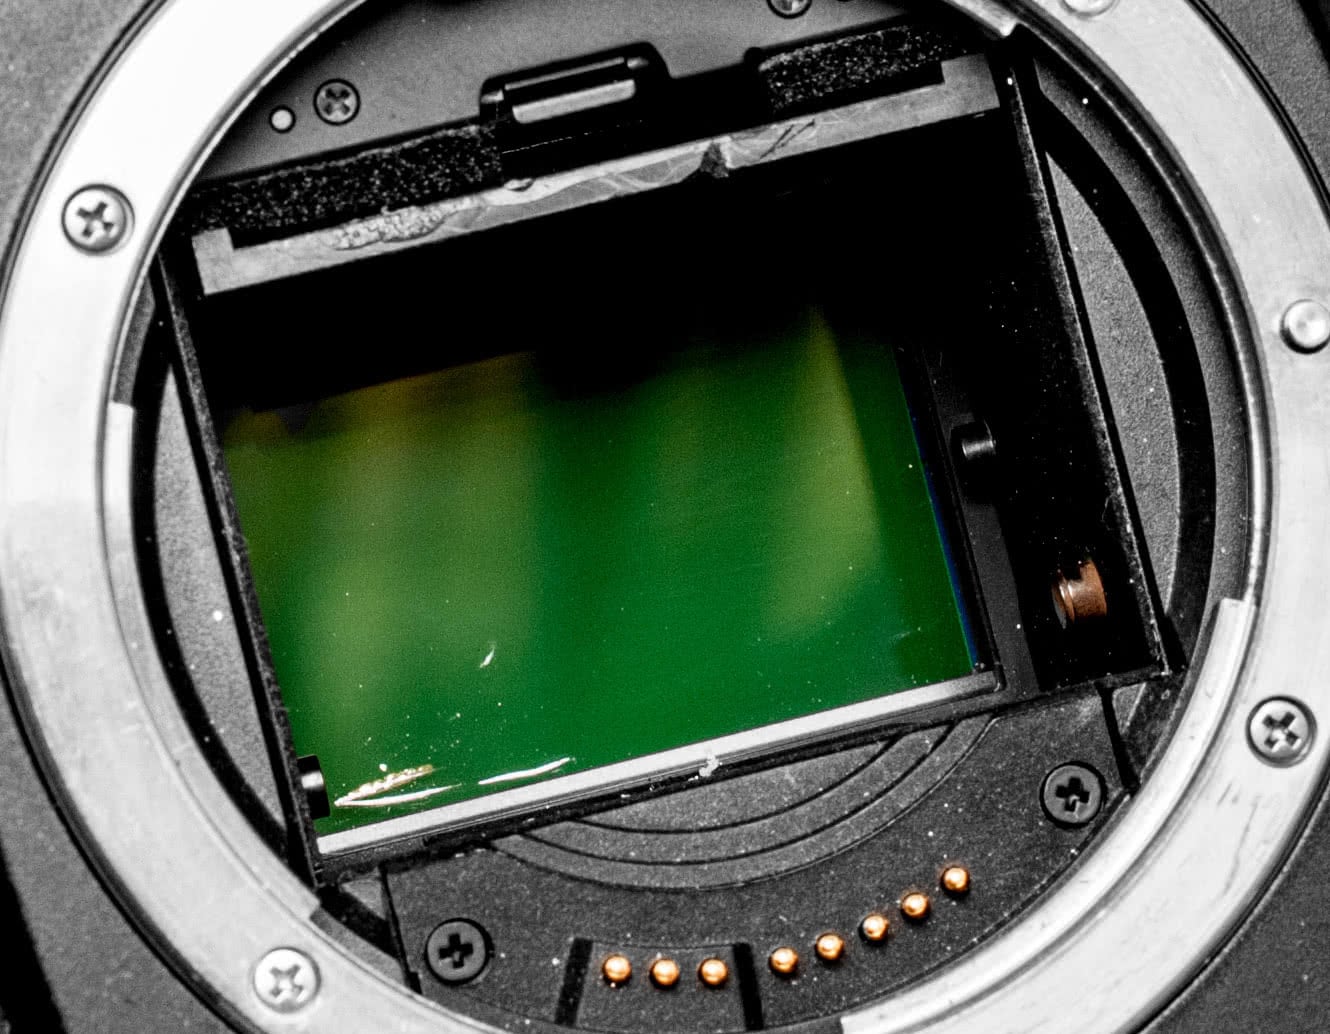 A scratched sensor on a Canon EOS 5D